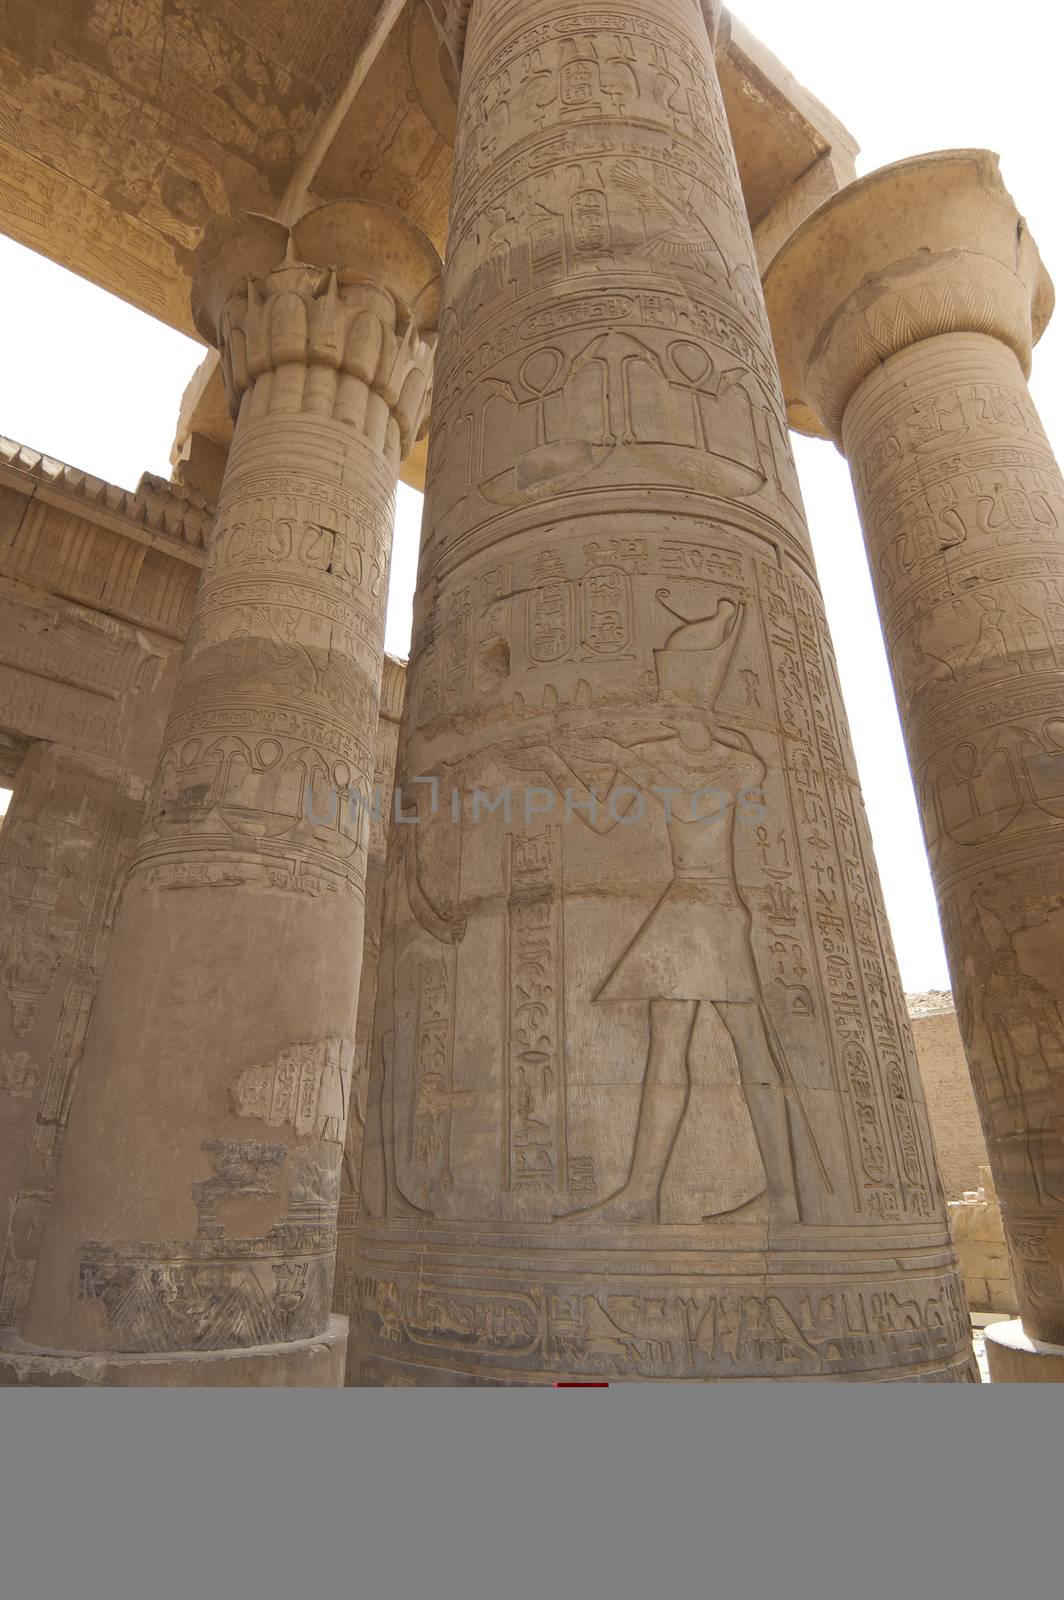 Columns at the Temple of Kom Ombo in Egypt with hieroglyphic carvings